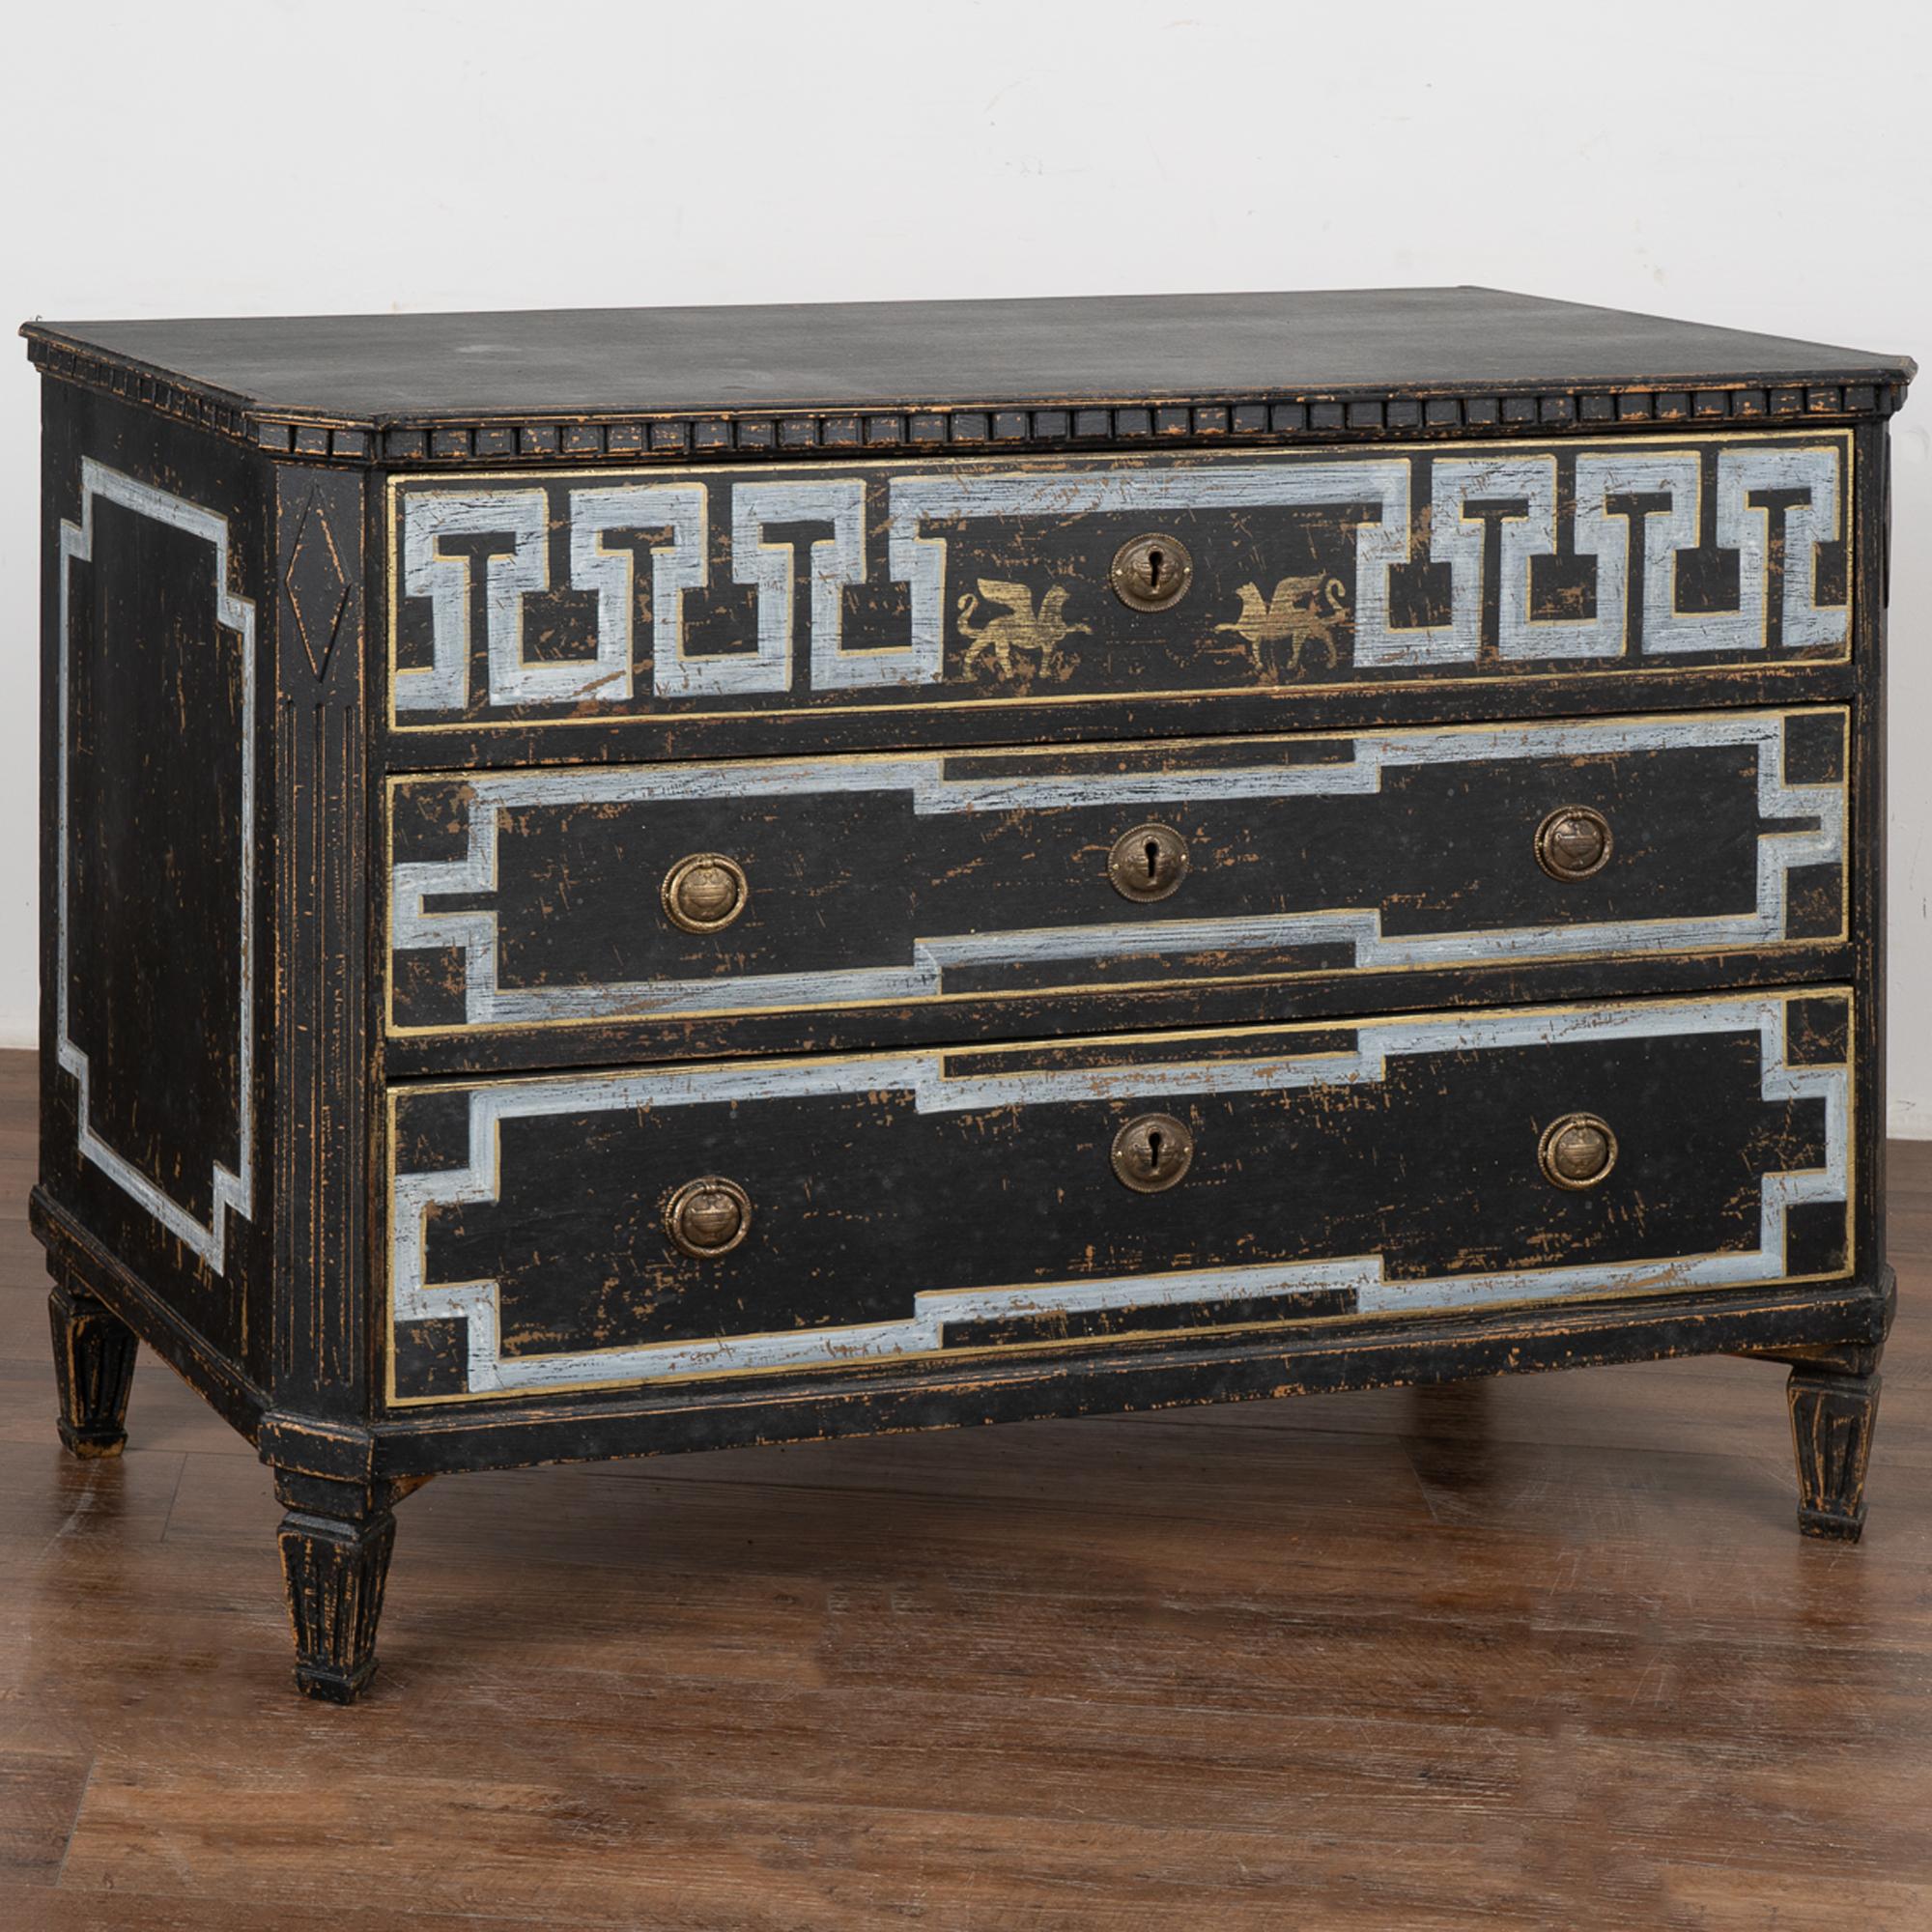 A large decorative Gustavian style pine chest of drawers with dramatic 